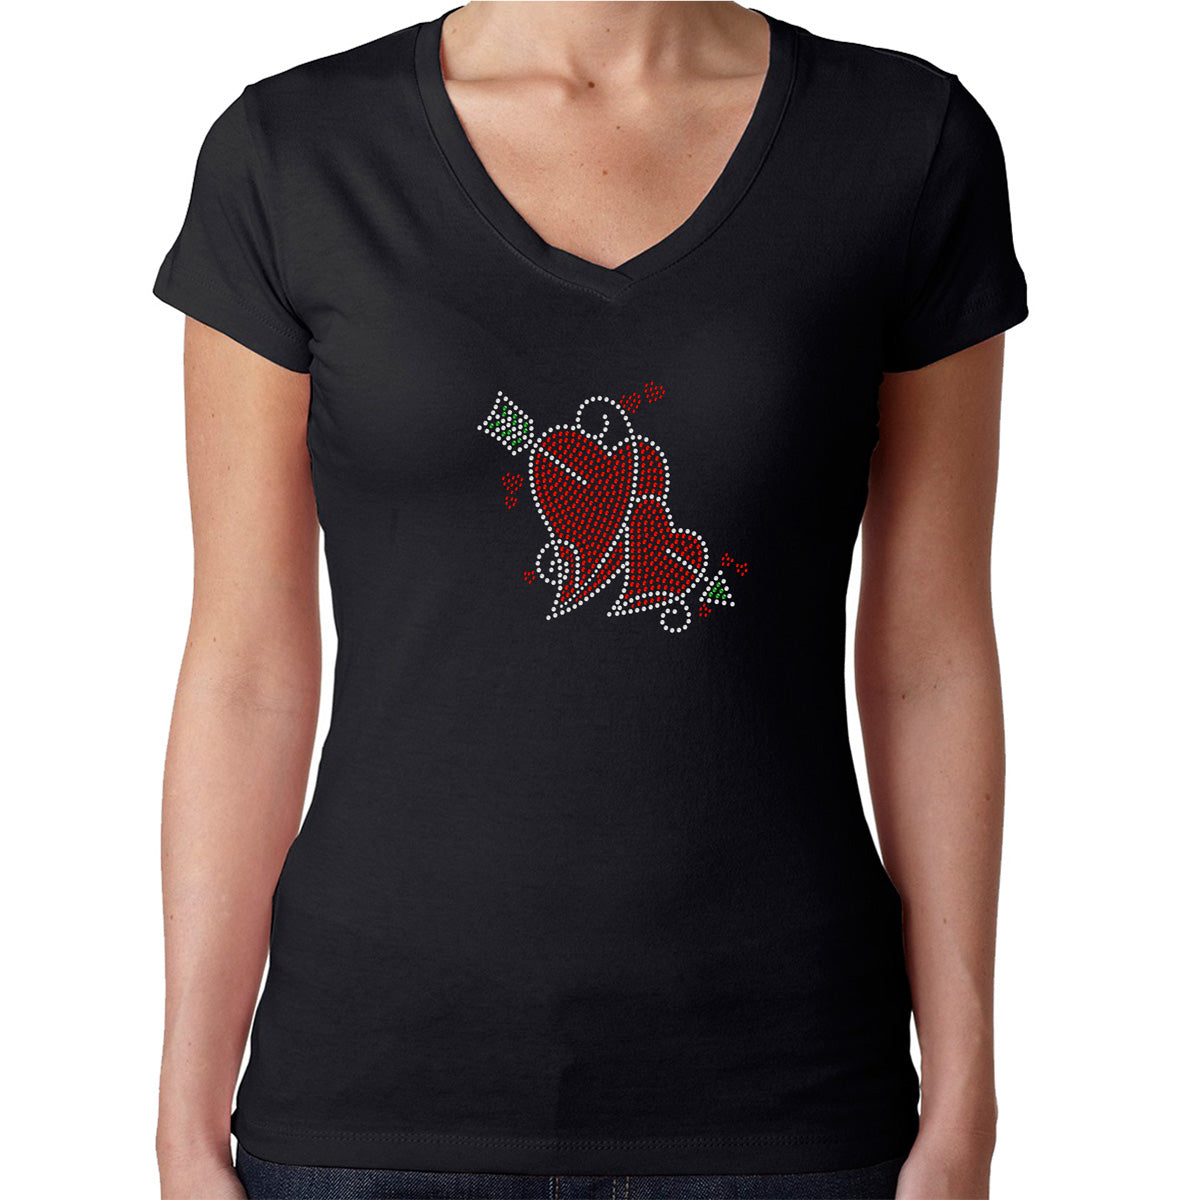 Womens T-Shirt Rhinestone Bling Black Fitted Tee Valentines Arrow Red Heart Love